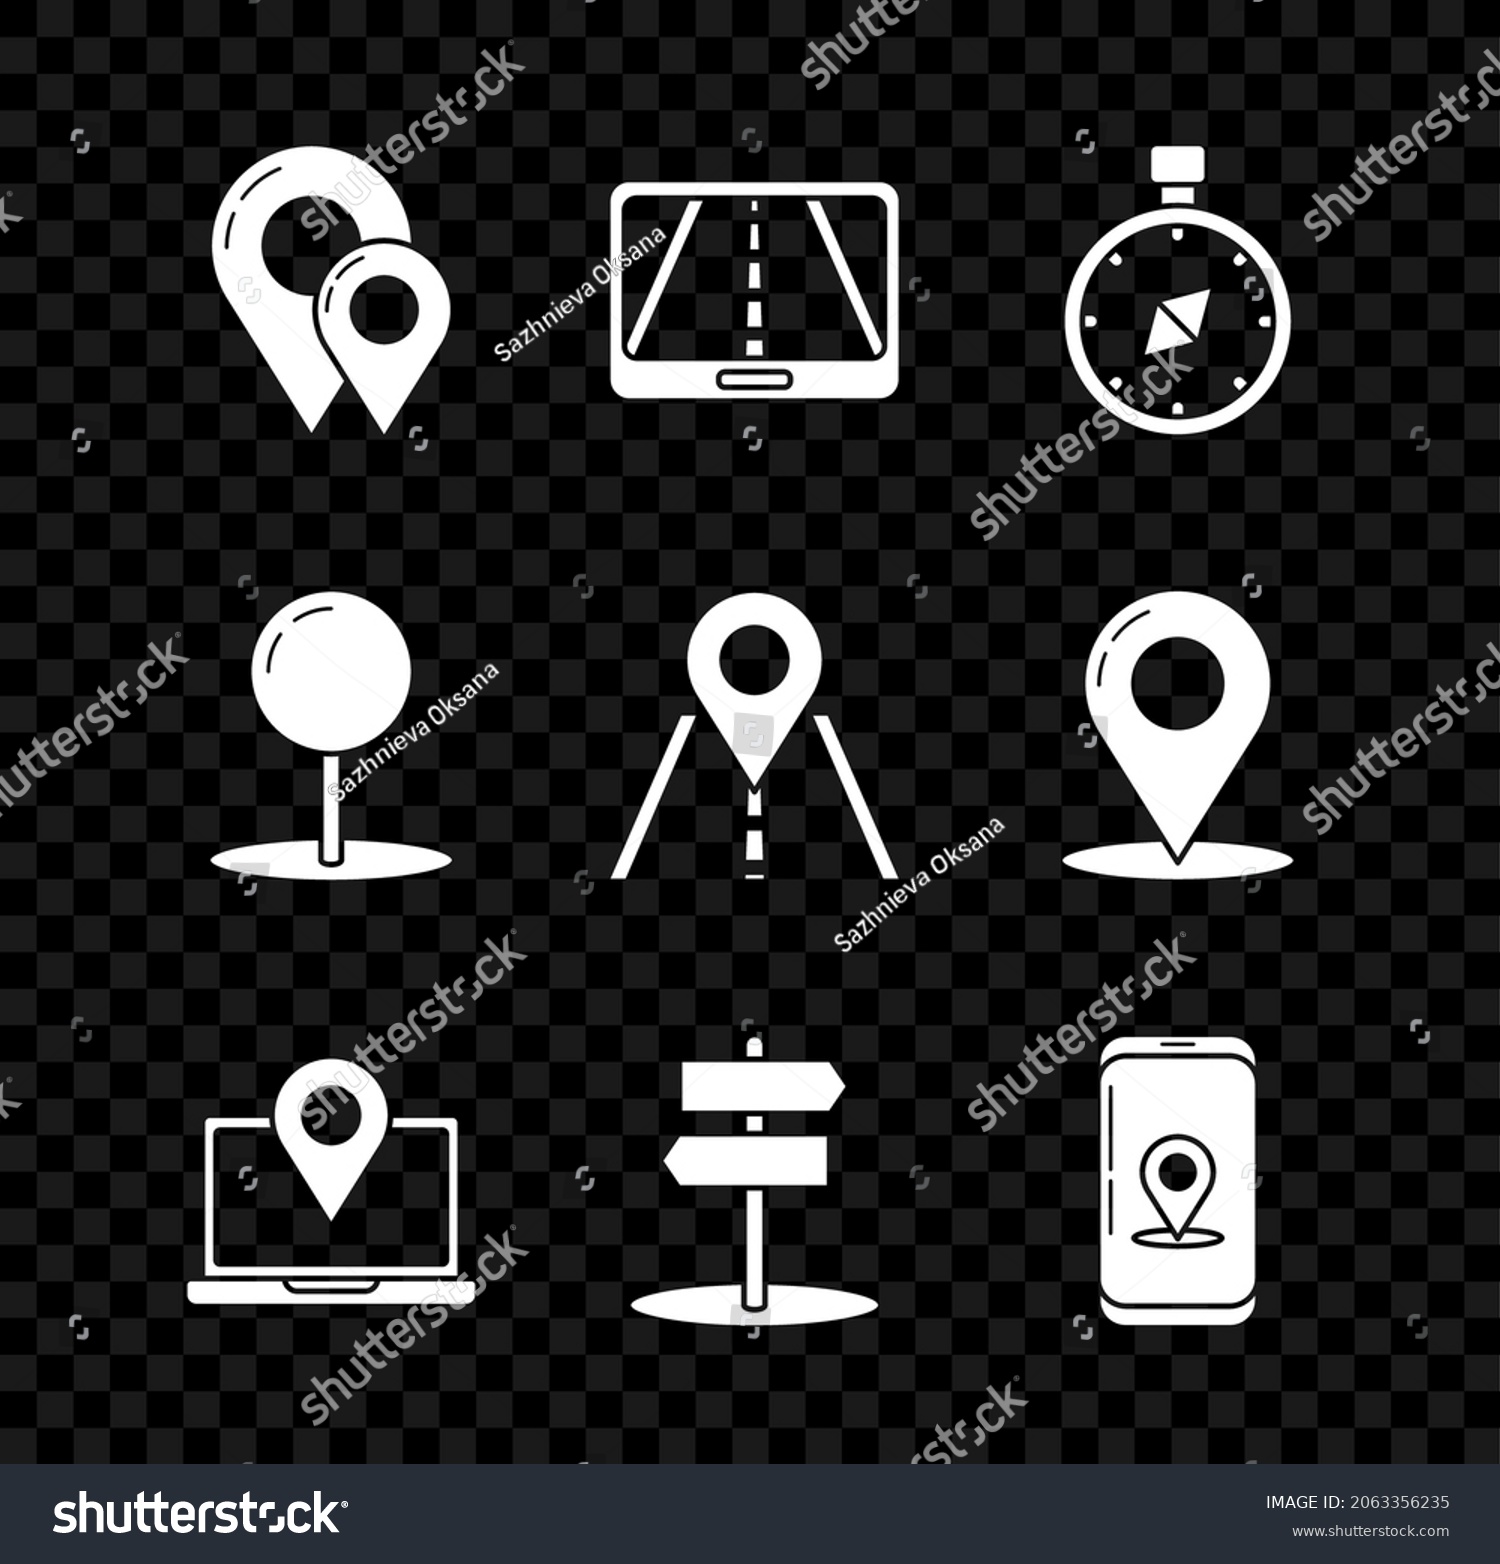 Stock Vector Set Map Pin Infographic Of City Map Navigation Compass Laptop With Location Marker Road Traffic 2063356235 